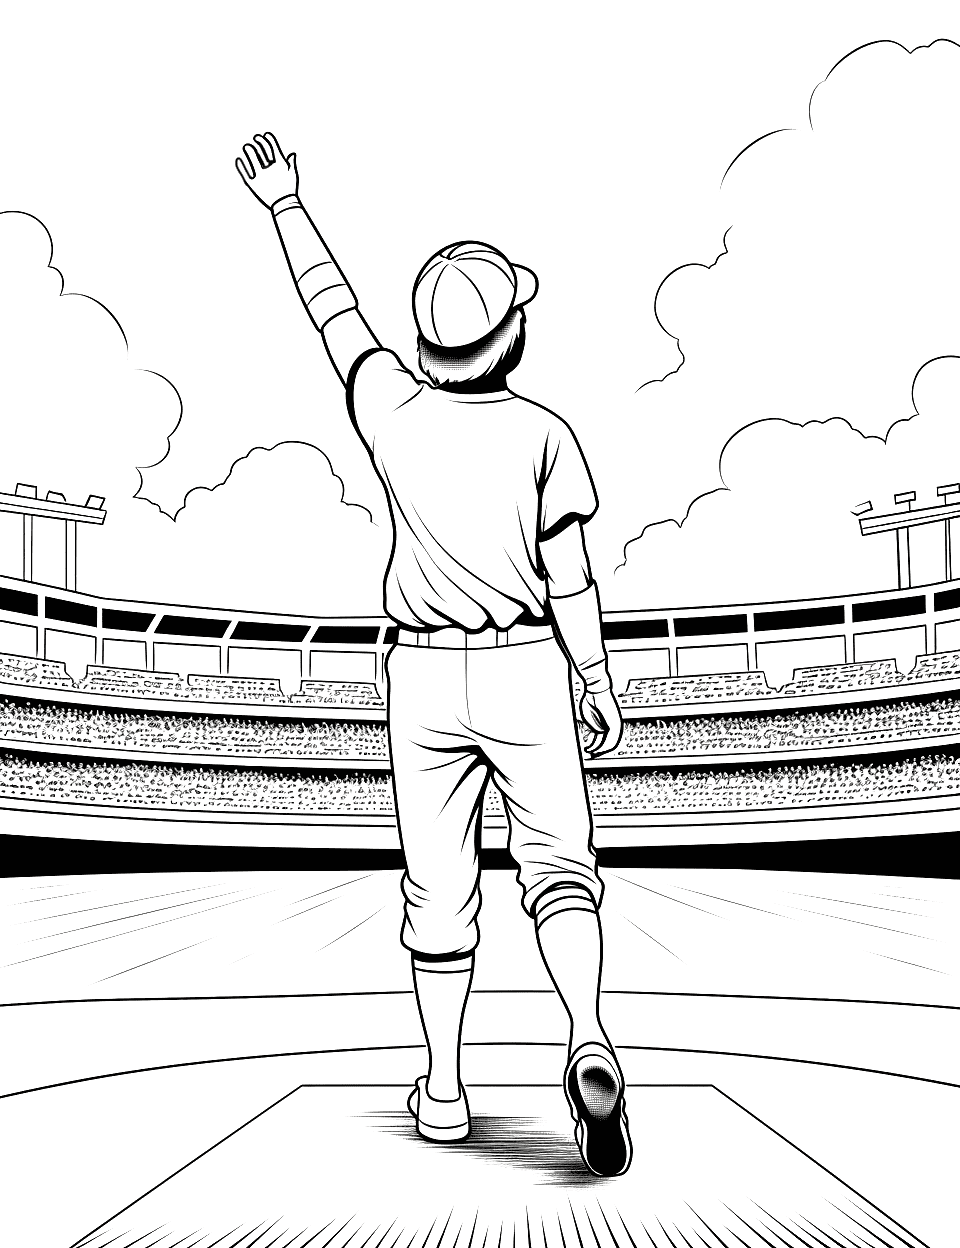 Legendary Player Tribute Baseball Coloring Page - A scene paying homage to a legendary baseball player, with a simple representation of their iconic moment.